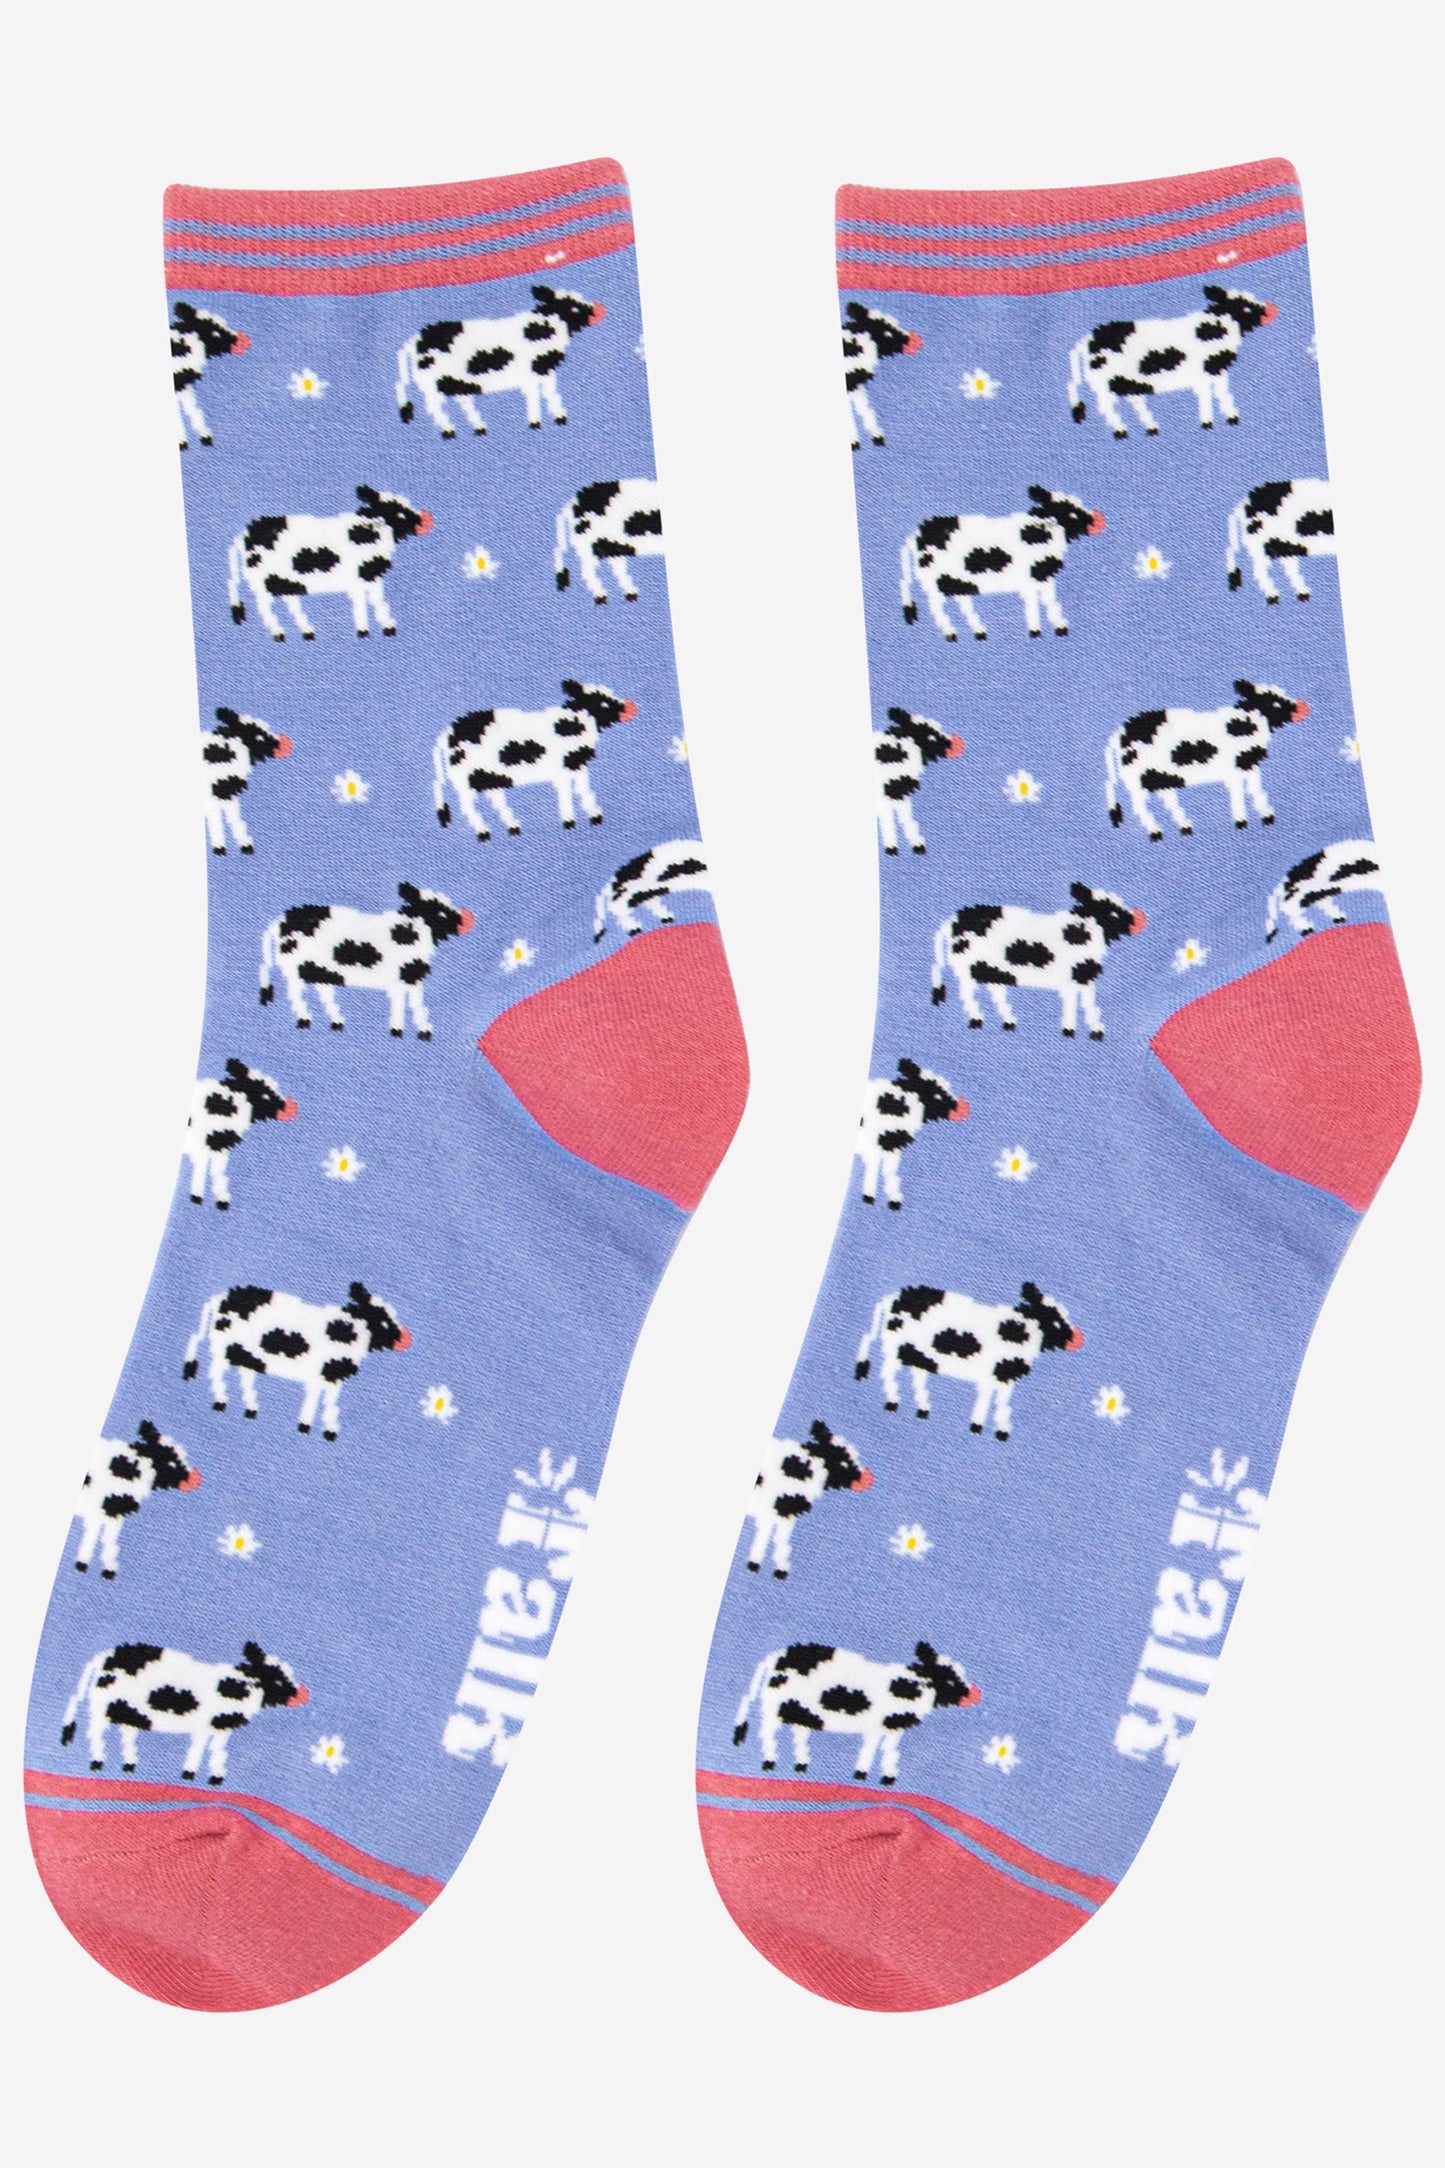 lilac bamboo socks with black and white cows all over 